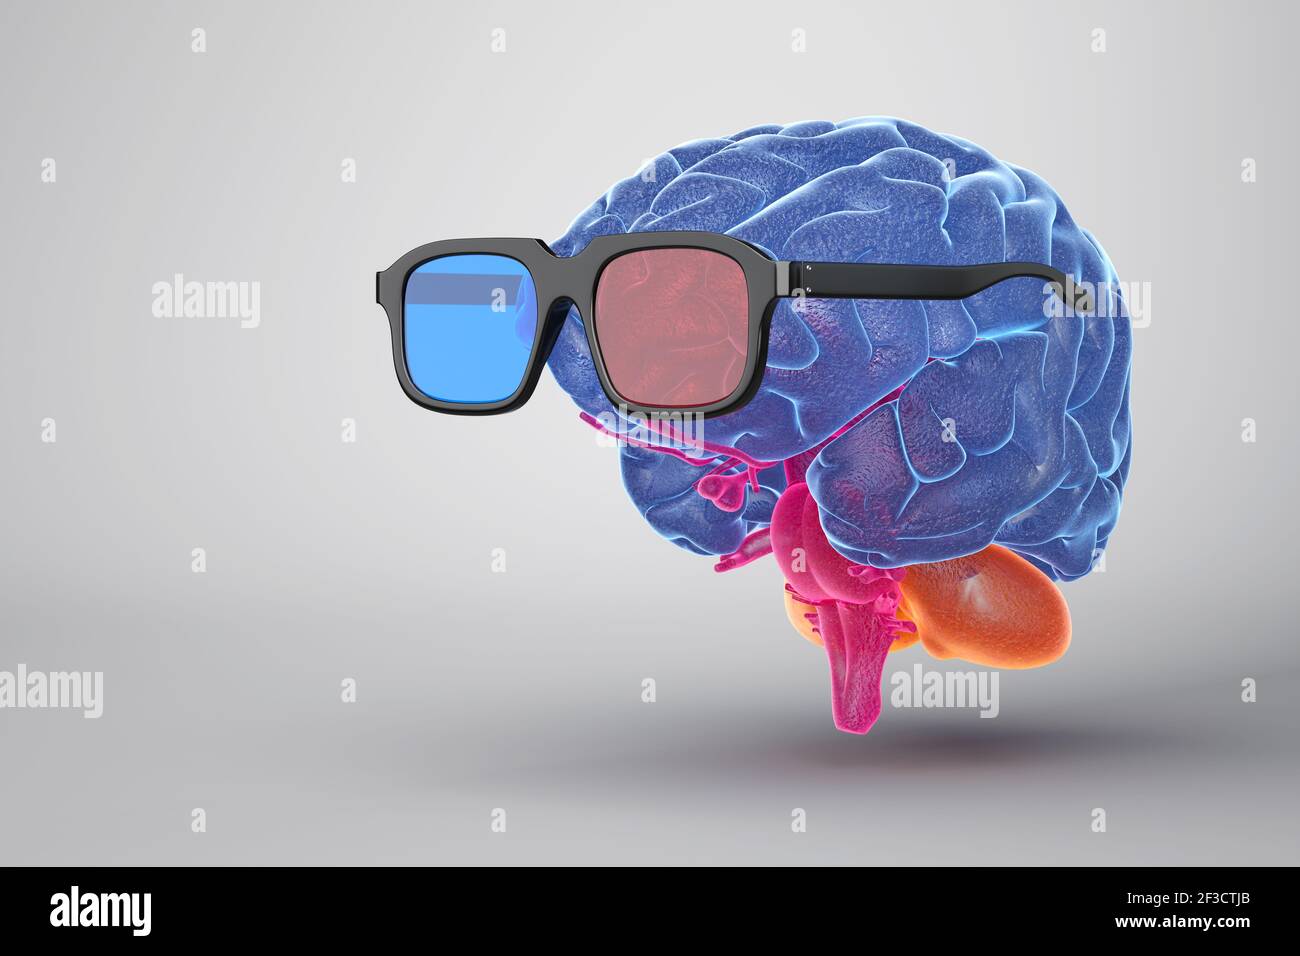 Human brain with 3D glasses, illustration in side view. 3D illustration Stock Photo